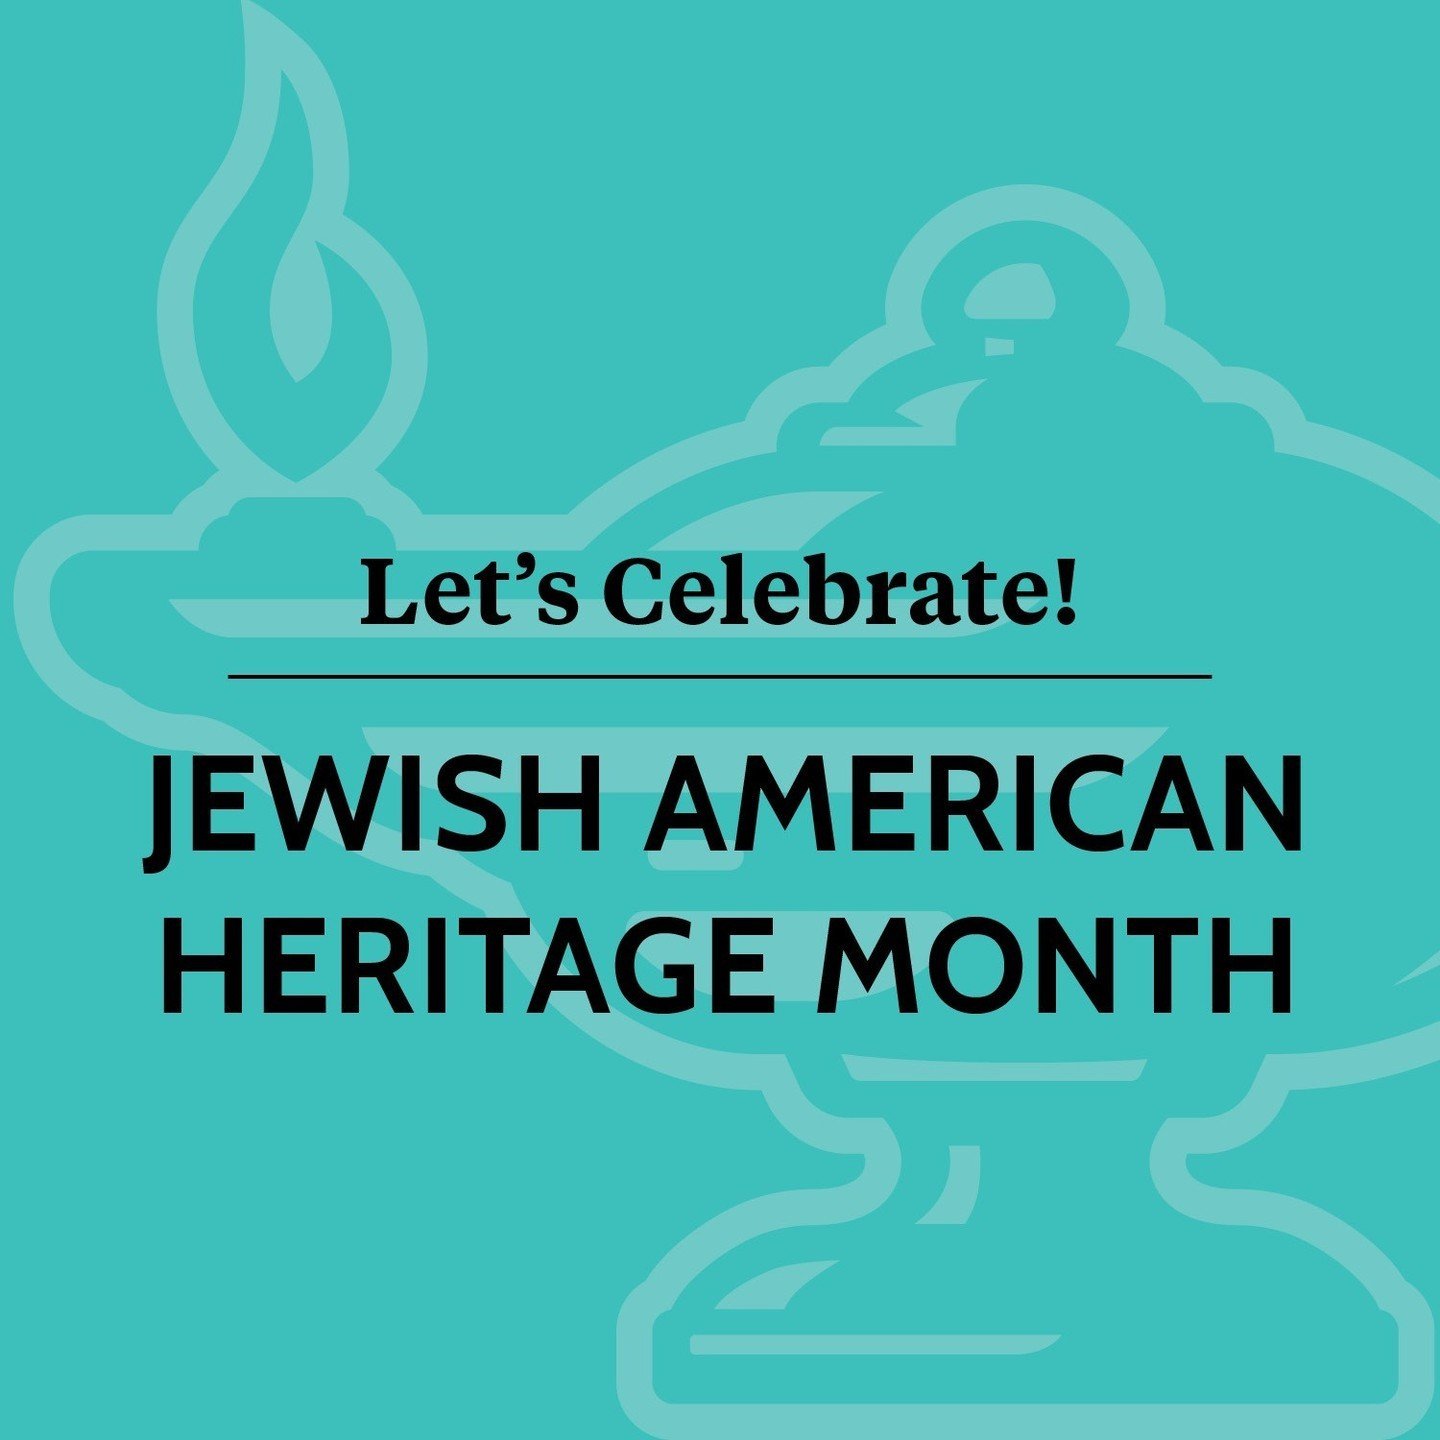 As we observe Jewish American Heritage Month, we recognize the meaningful contributions of Browning students to the celebrations.⁠
⁠
In the Upper School, our Jewish Alliance Group uses its weekly meeting time to process the challenging events of the 